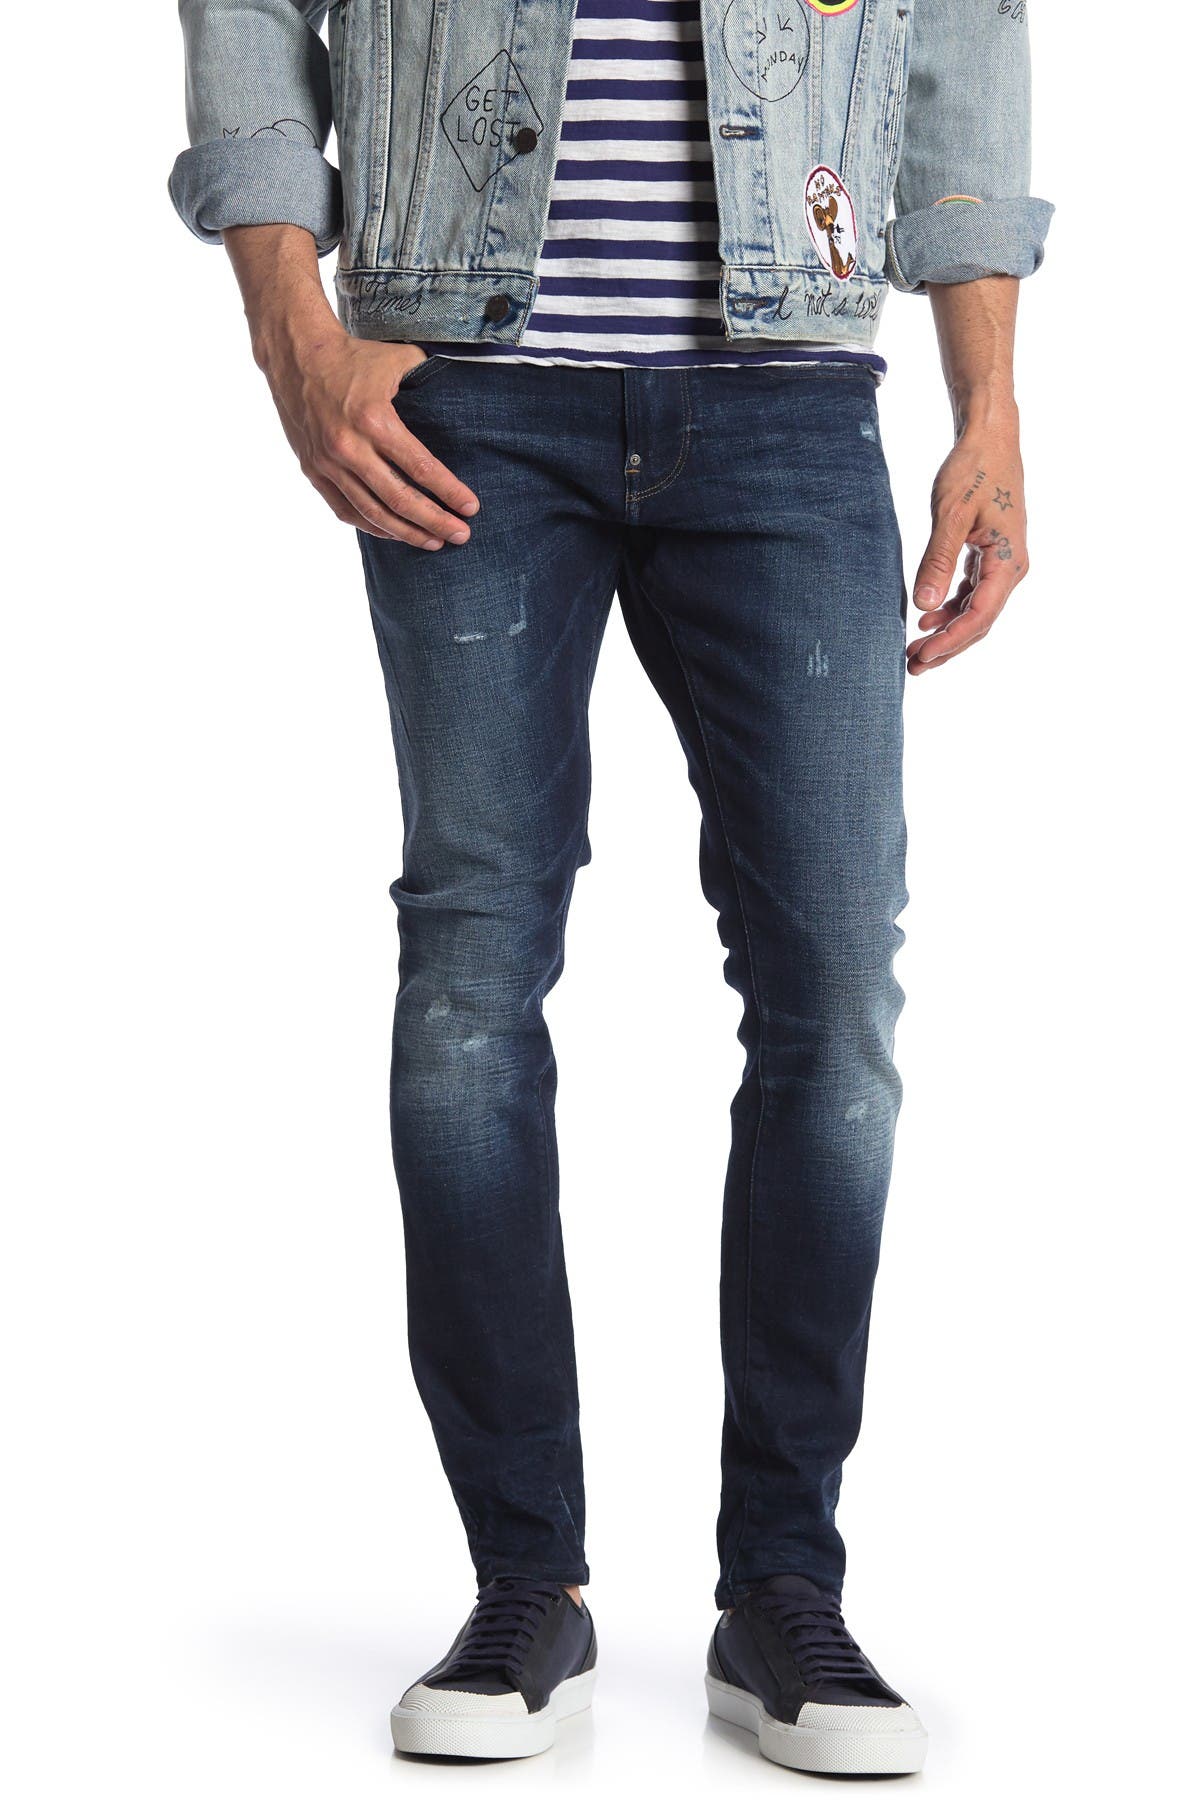 32 34 jeans